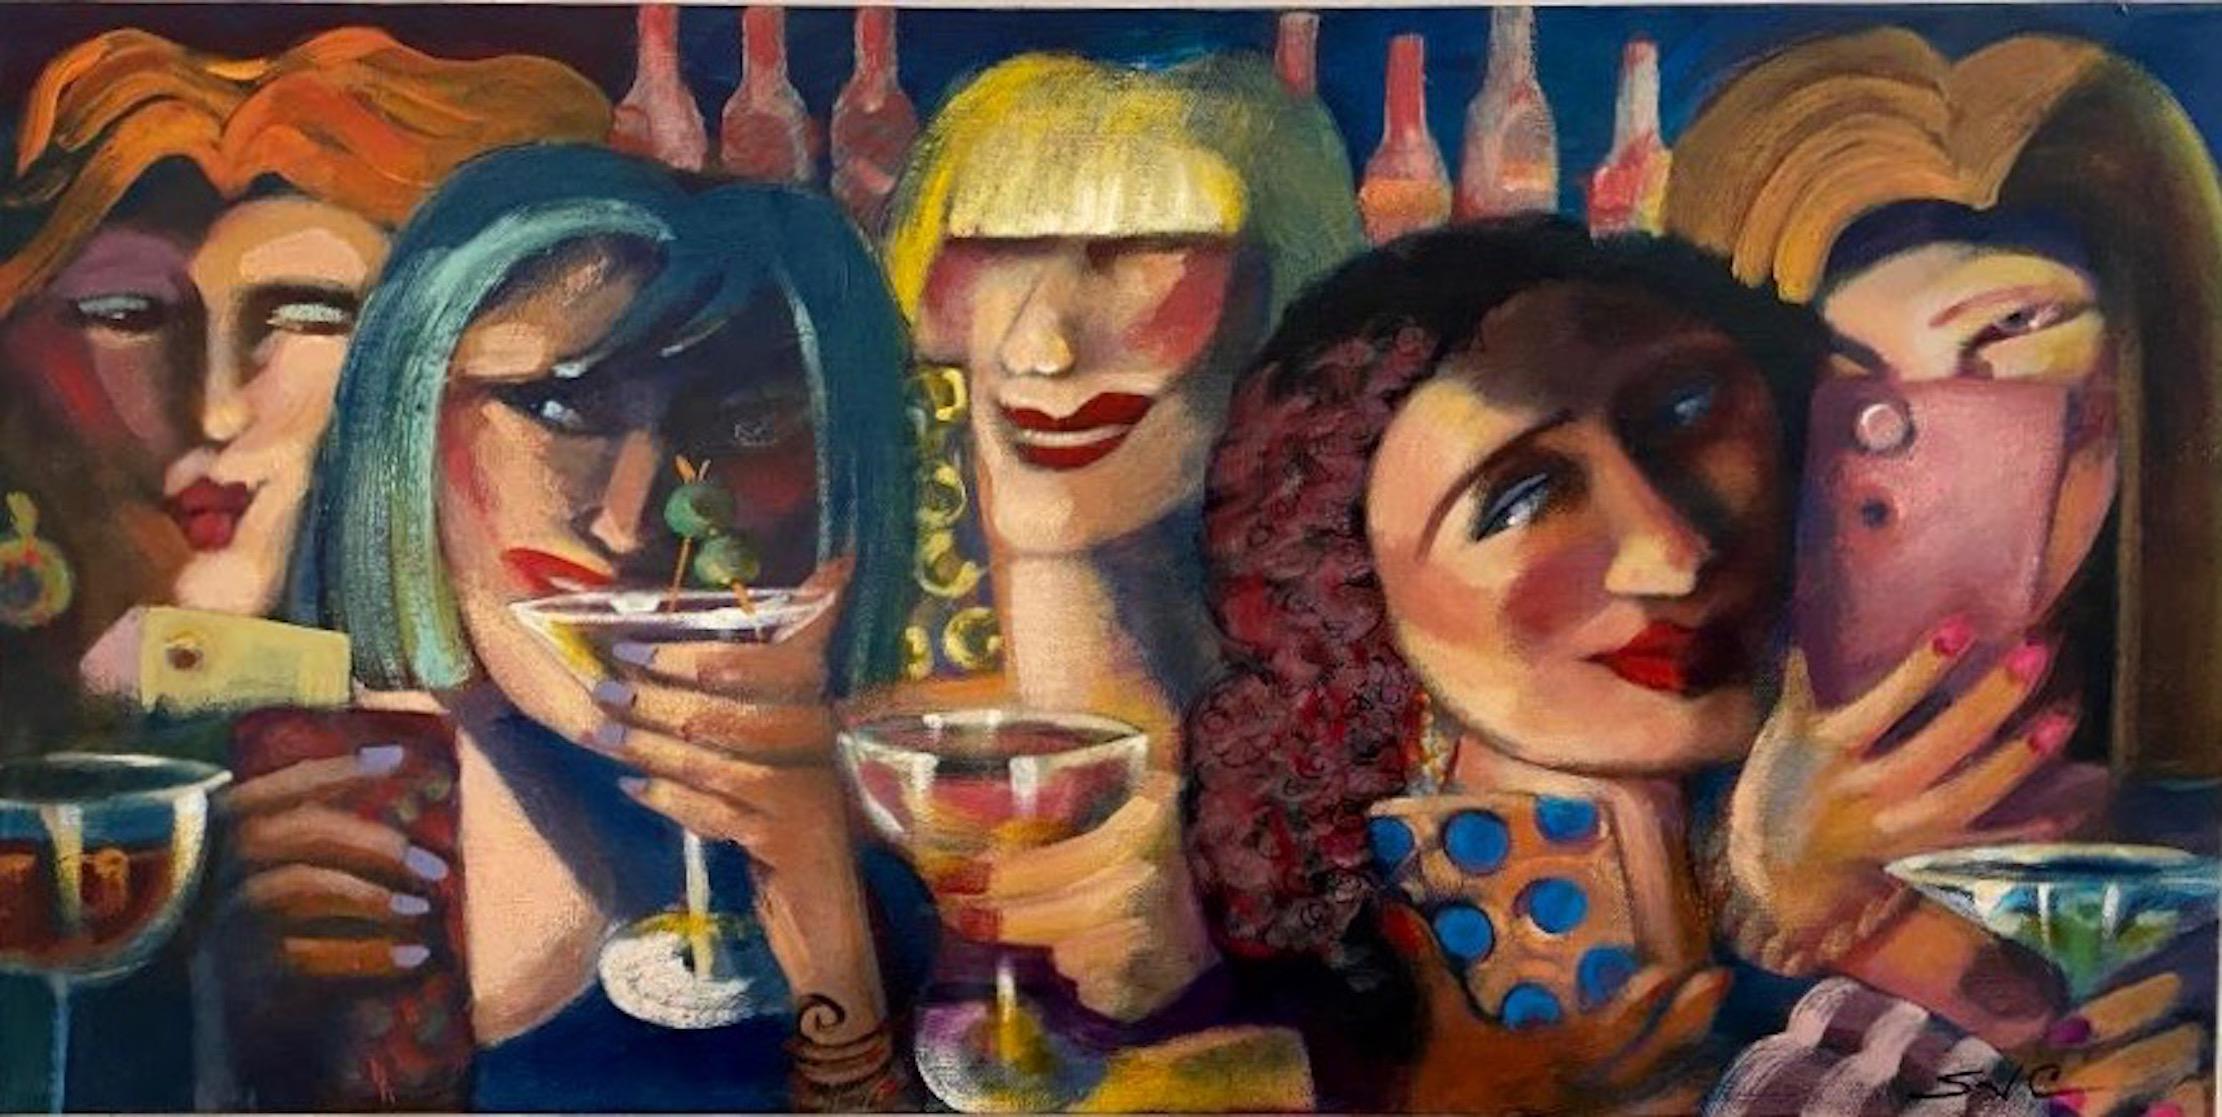 Sandra Jones Campbell Figurative Painting - "Girls Night Out Goes Viral" Contemporary Expressionist Figure Painting